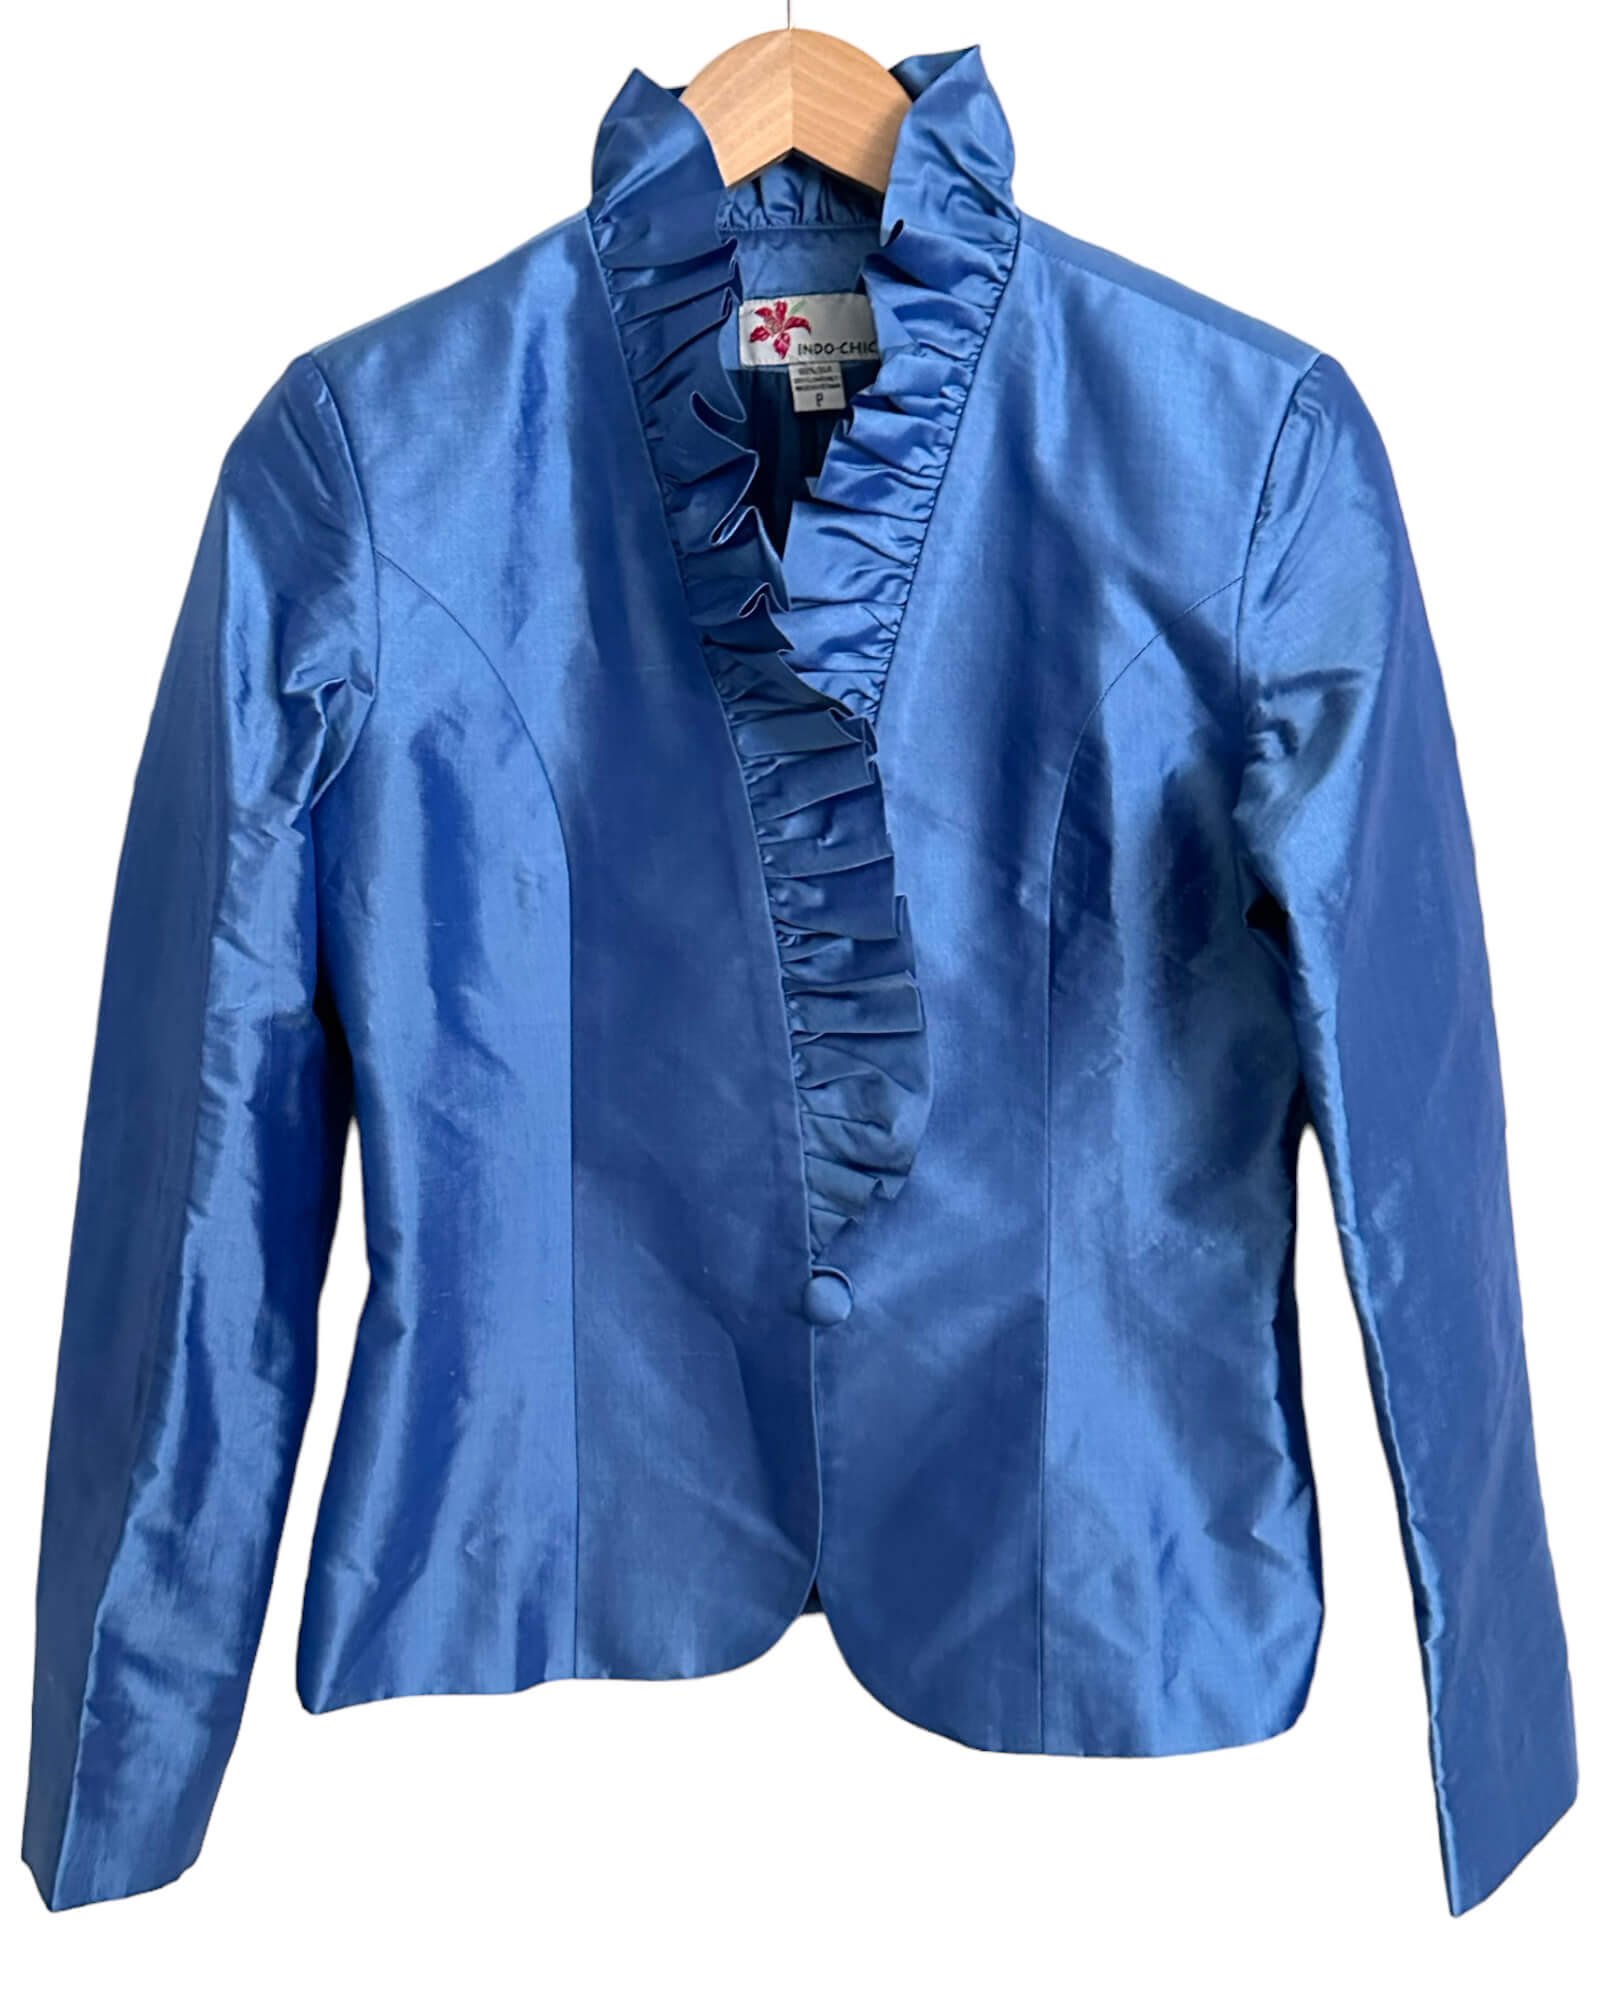 Cool Summer INDO-CHIC crushed silk ruffle jacket bluebell blue